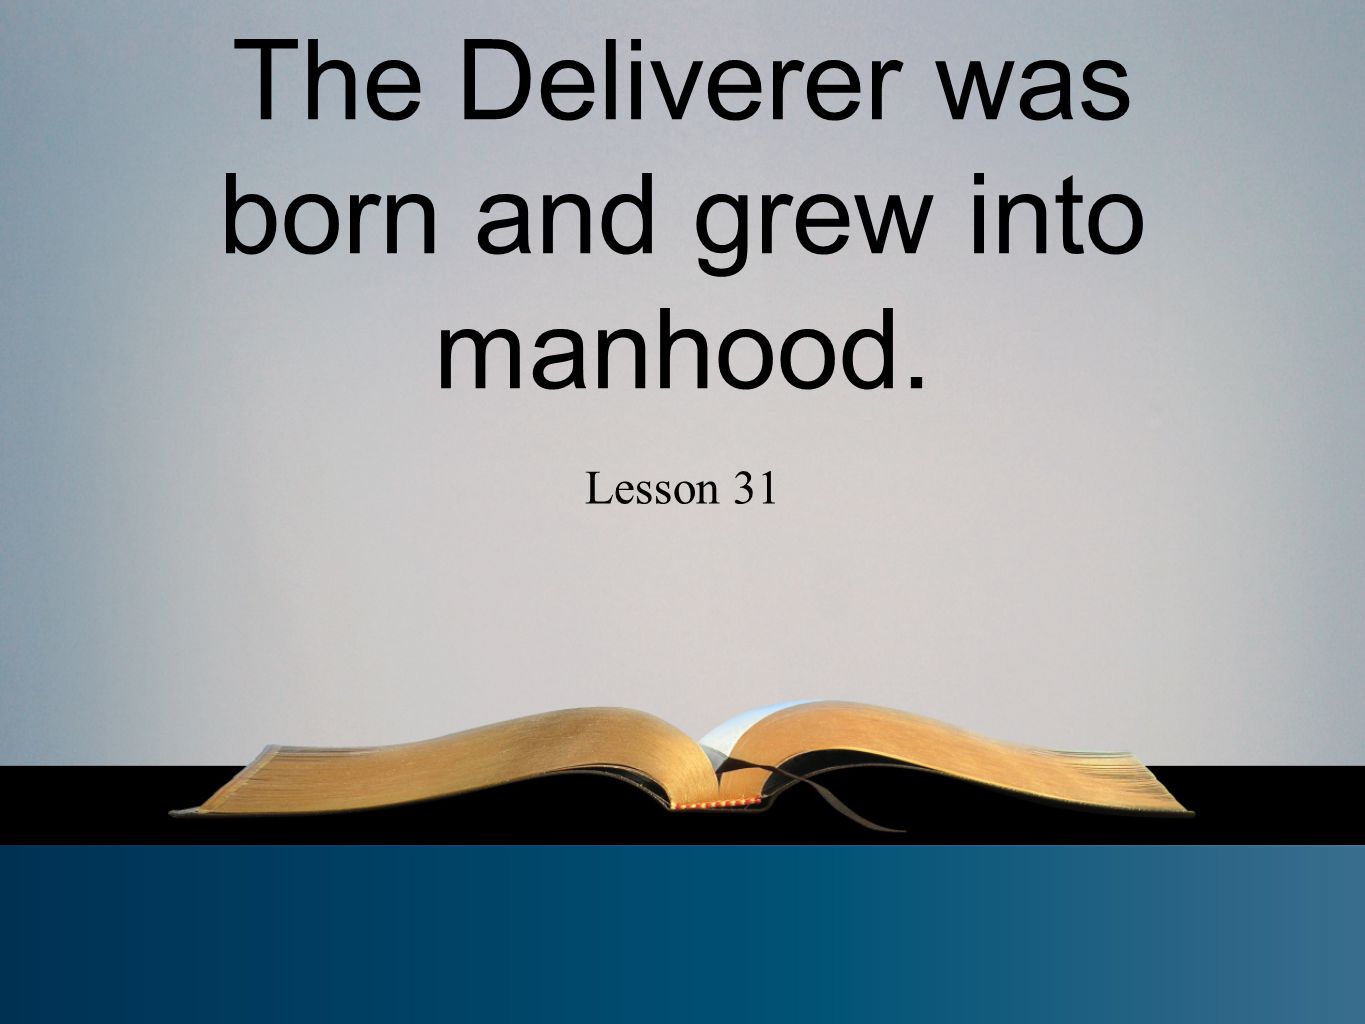 The Deliverer was born and grew into manhood. Lesson 31